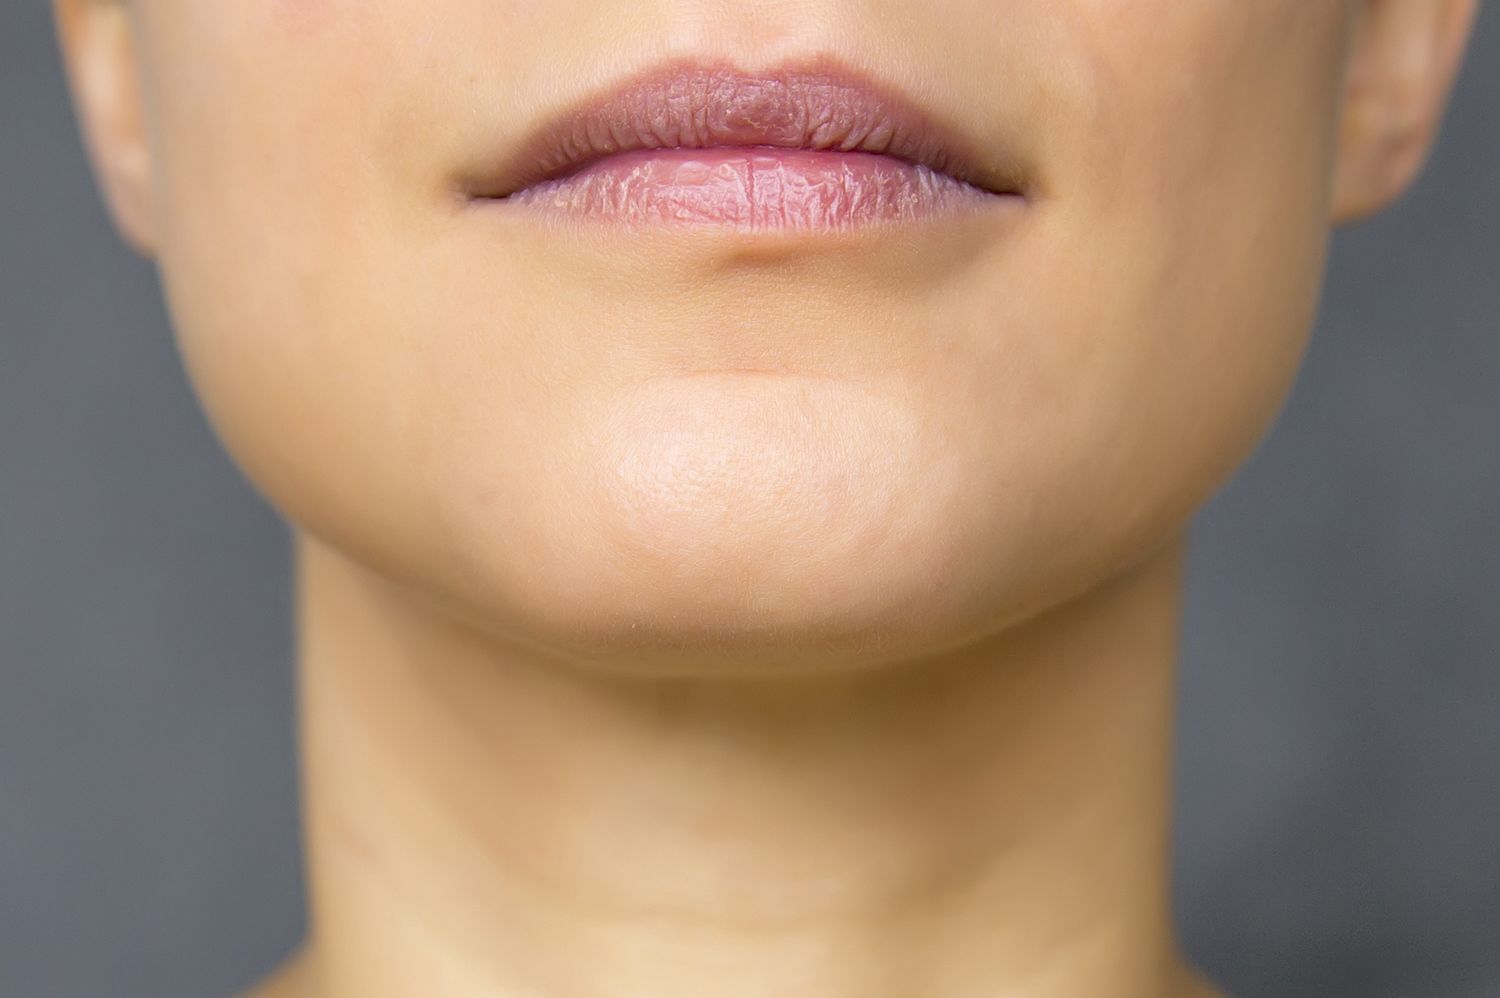 7 Surprising Facts About the Chin | Mental Floss